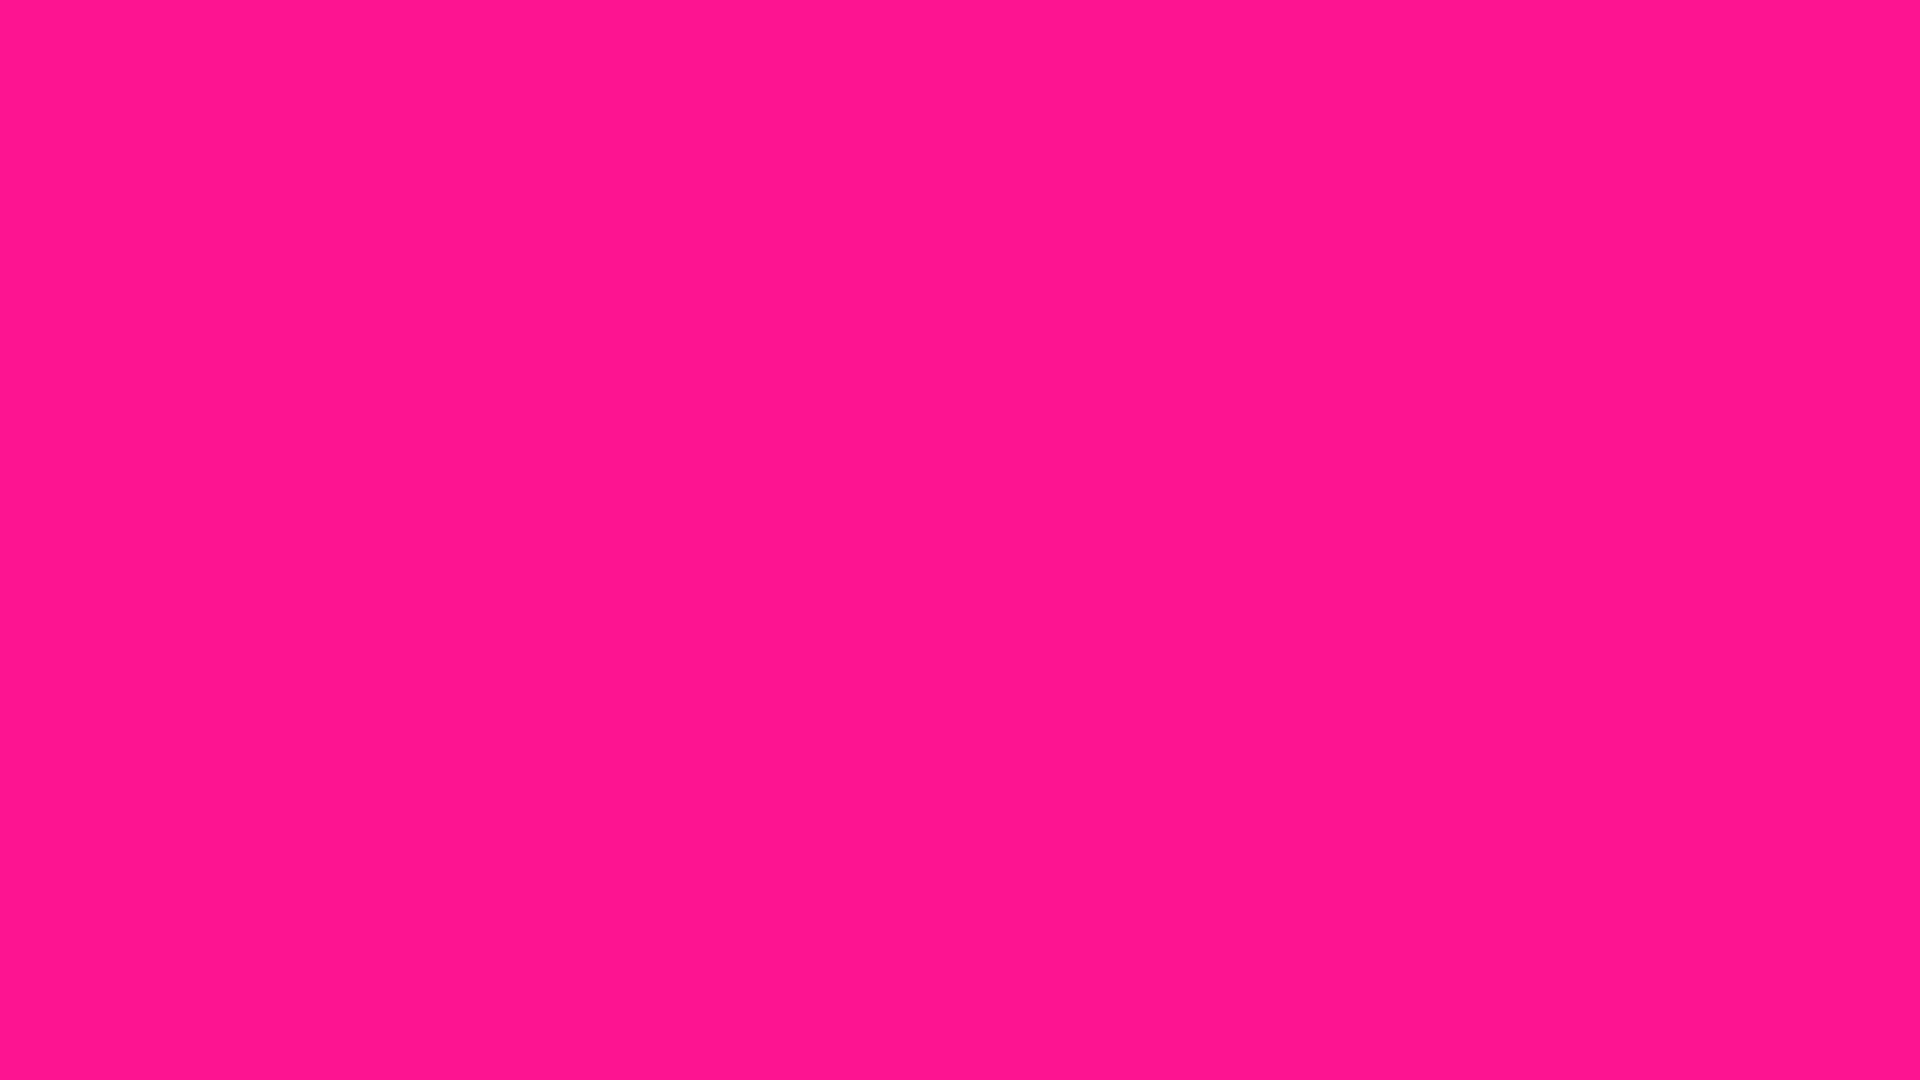 1920x1080 Deep Pink Solid Color Background